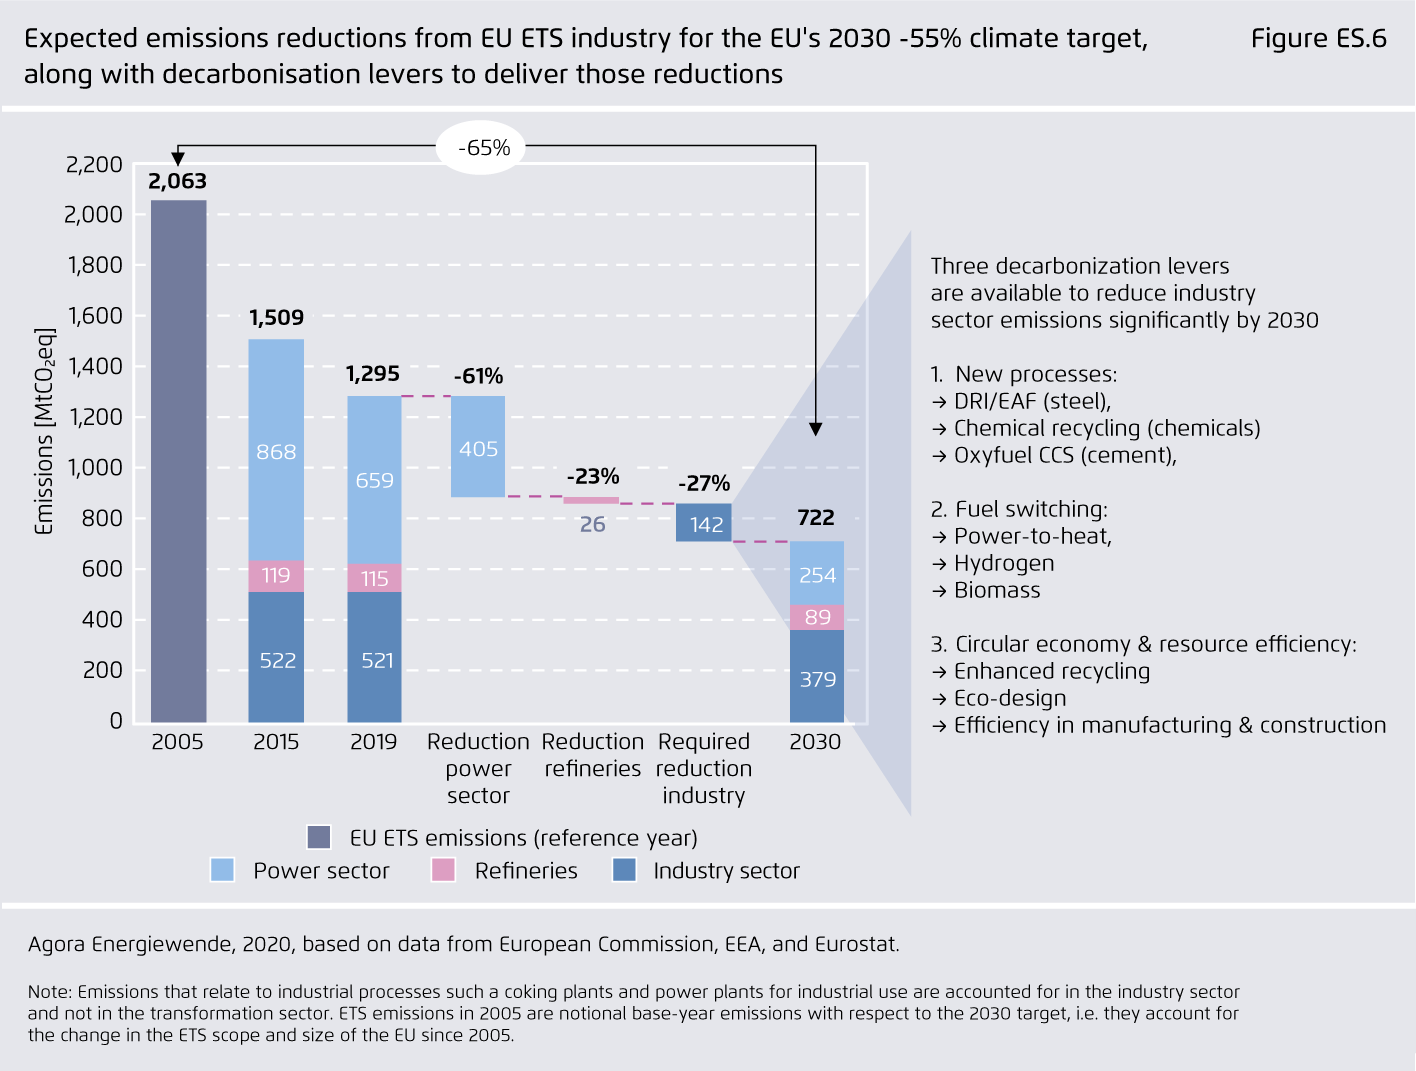 Preview for Expected emissions reductions from EU ETS industry for the EU's 2030 -55% climate target, along with decarbonisation levers to deliver those reductions